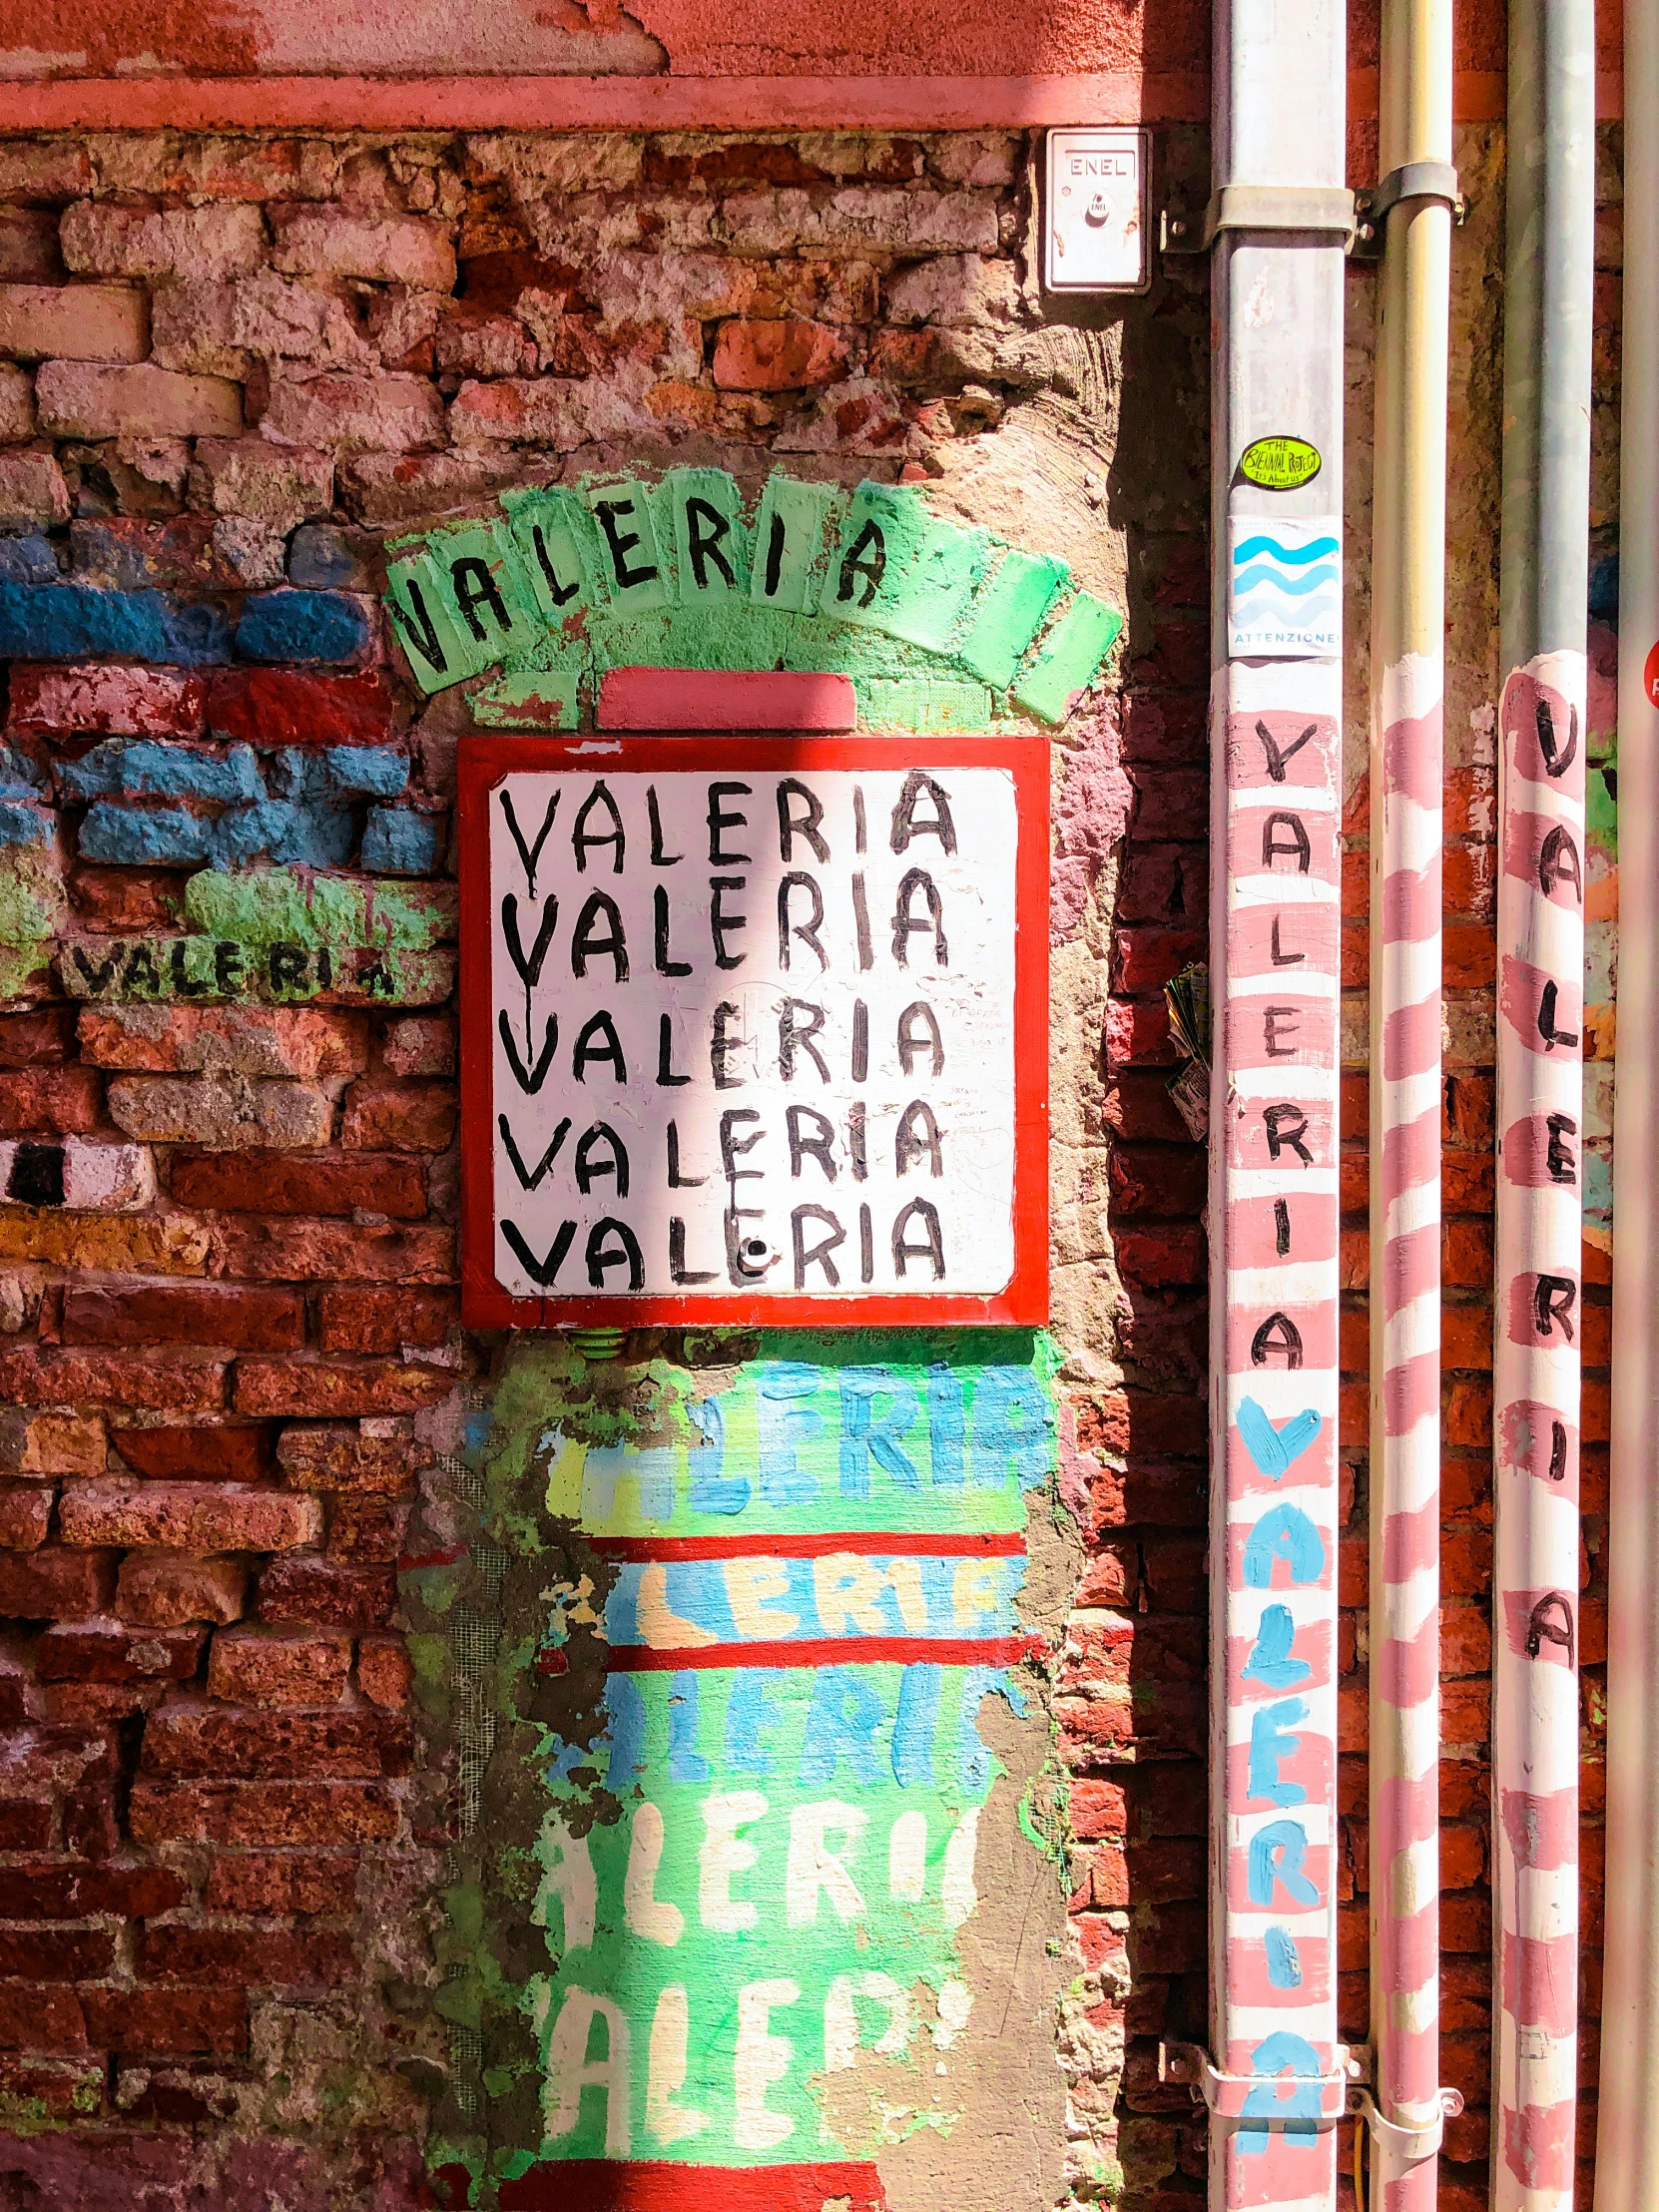 a brick wall with street signs painted on it